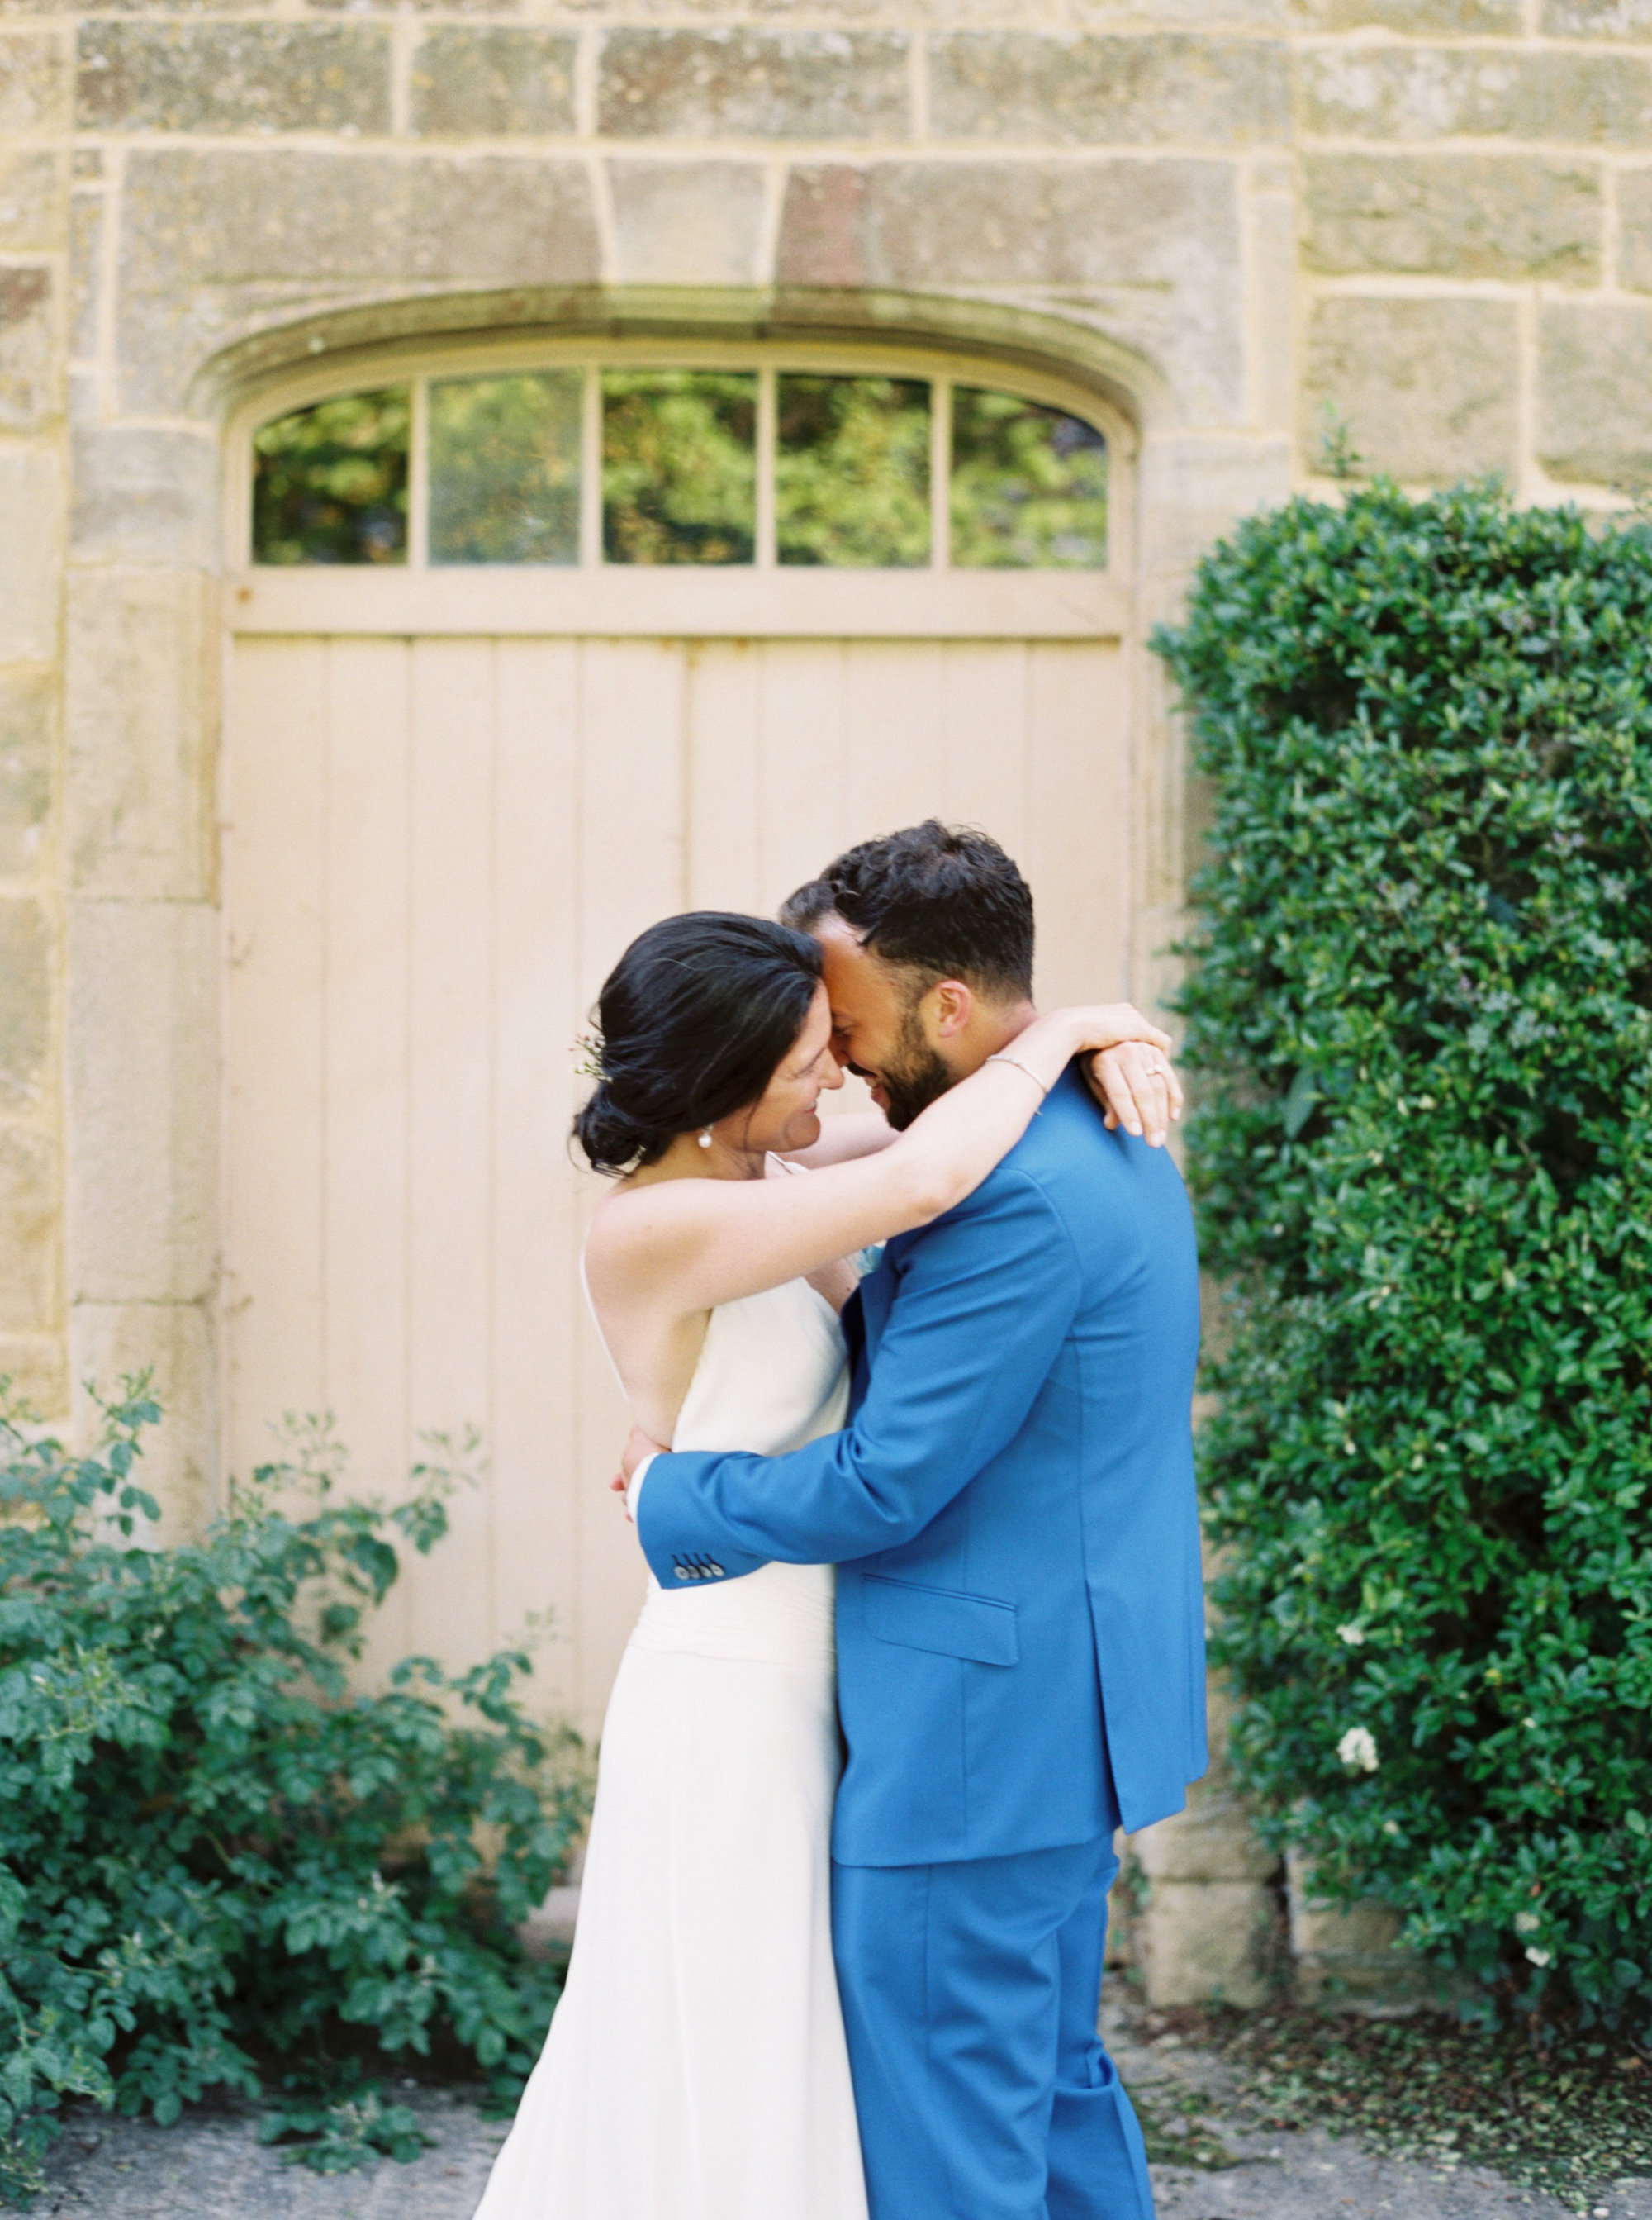 Lily & Sage | English Country Manor Wedding | Nicole Colwell Photography